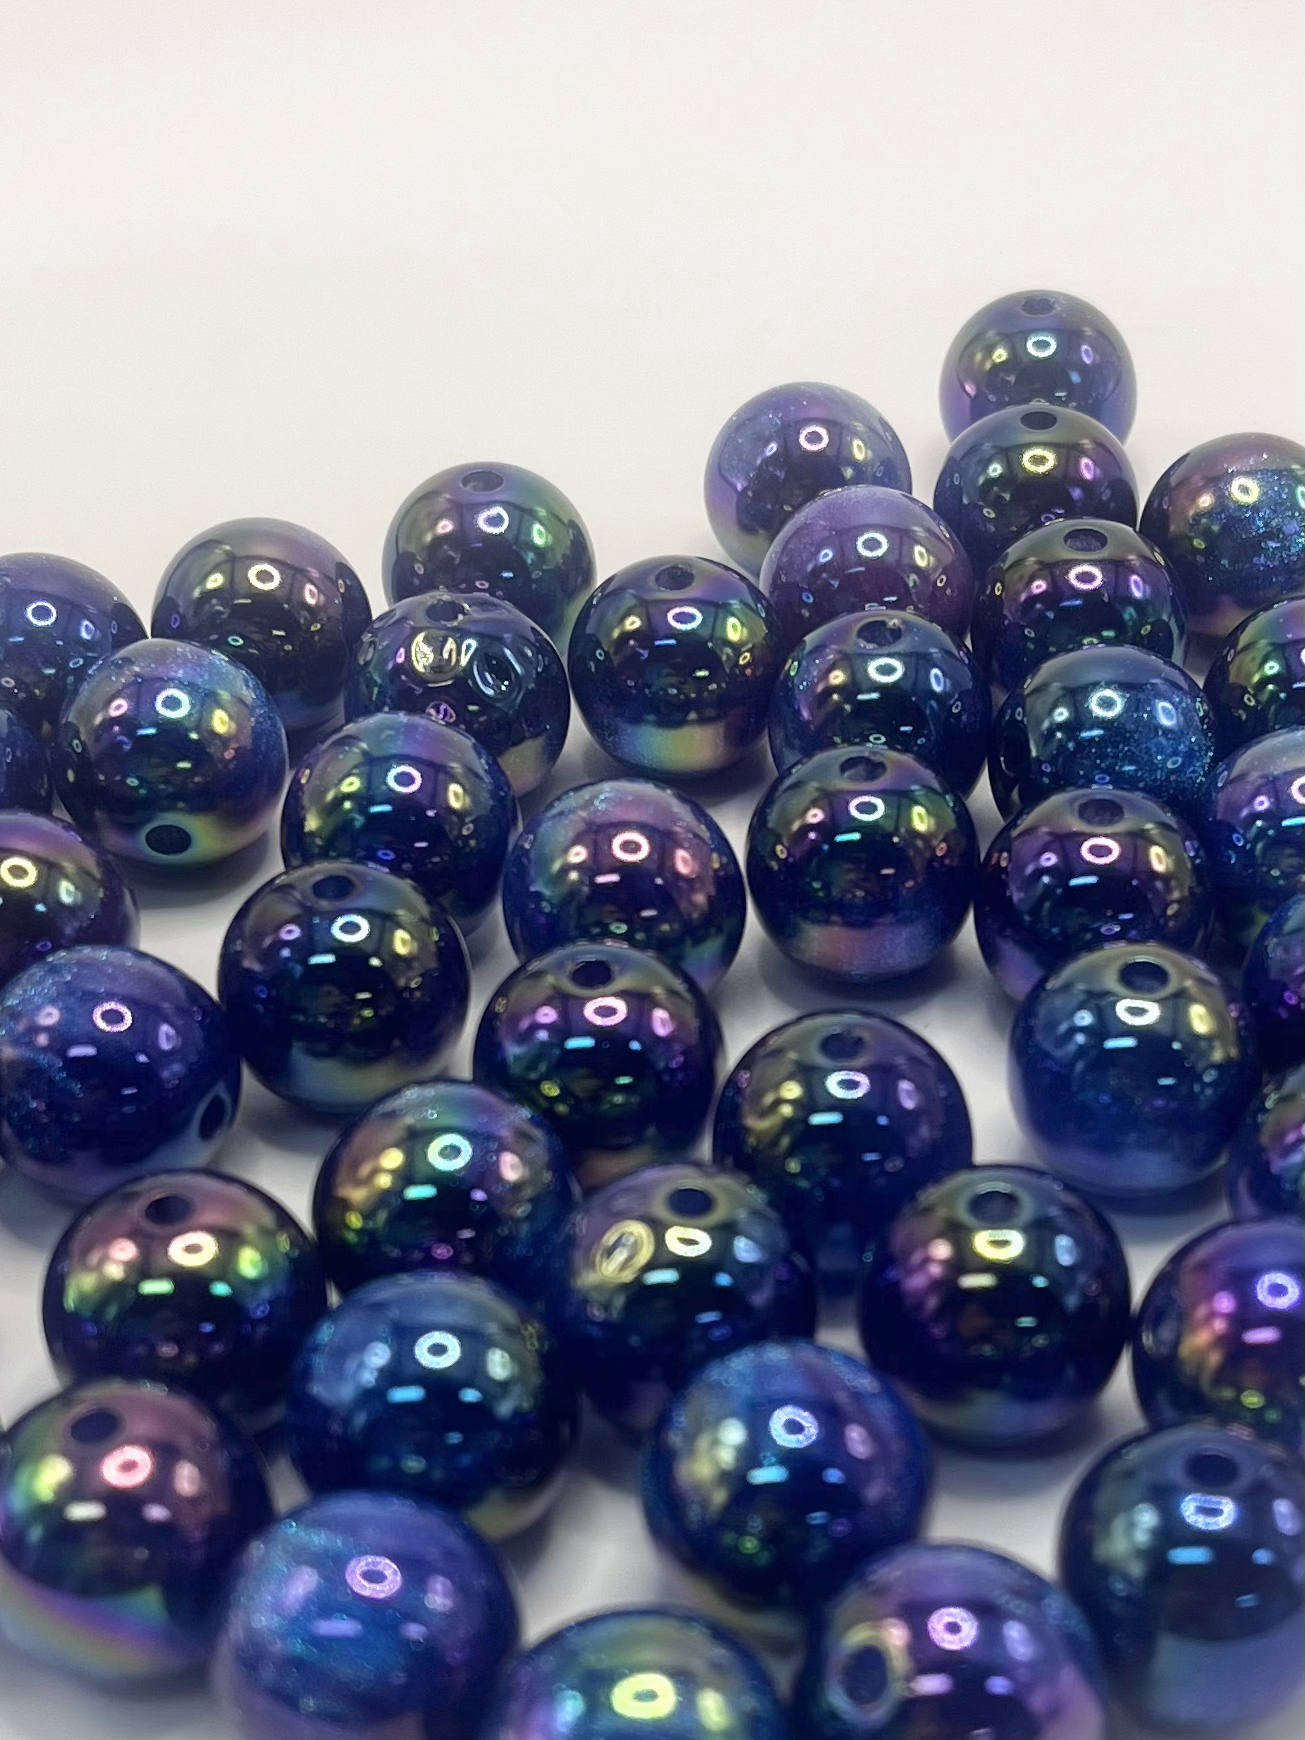 Glossy Acrylic Beads with Glitter Inside, Little UV Plating, 16mm, FS